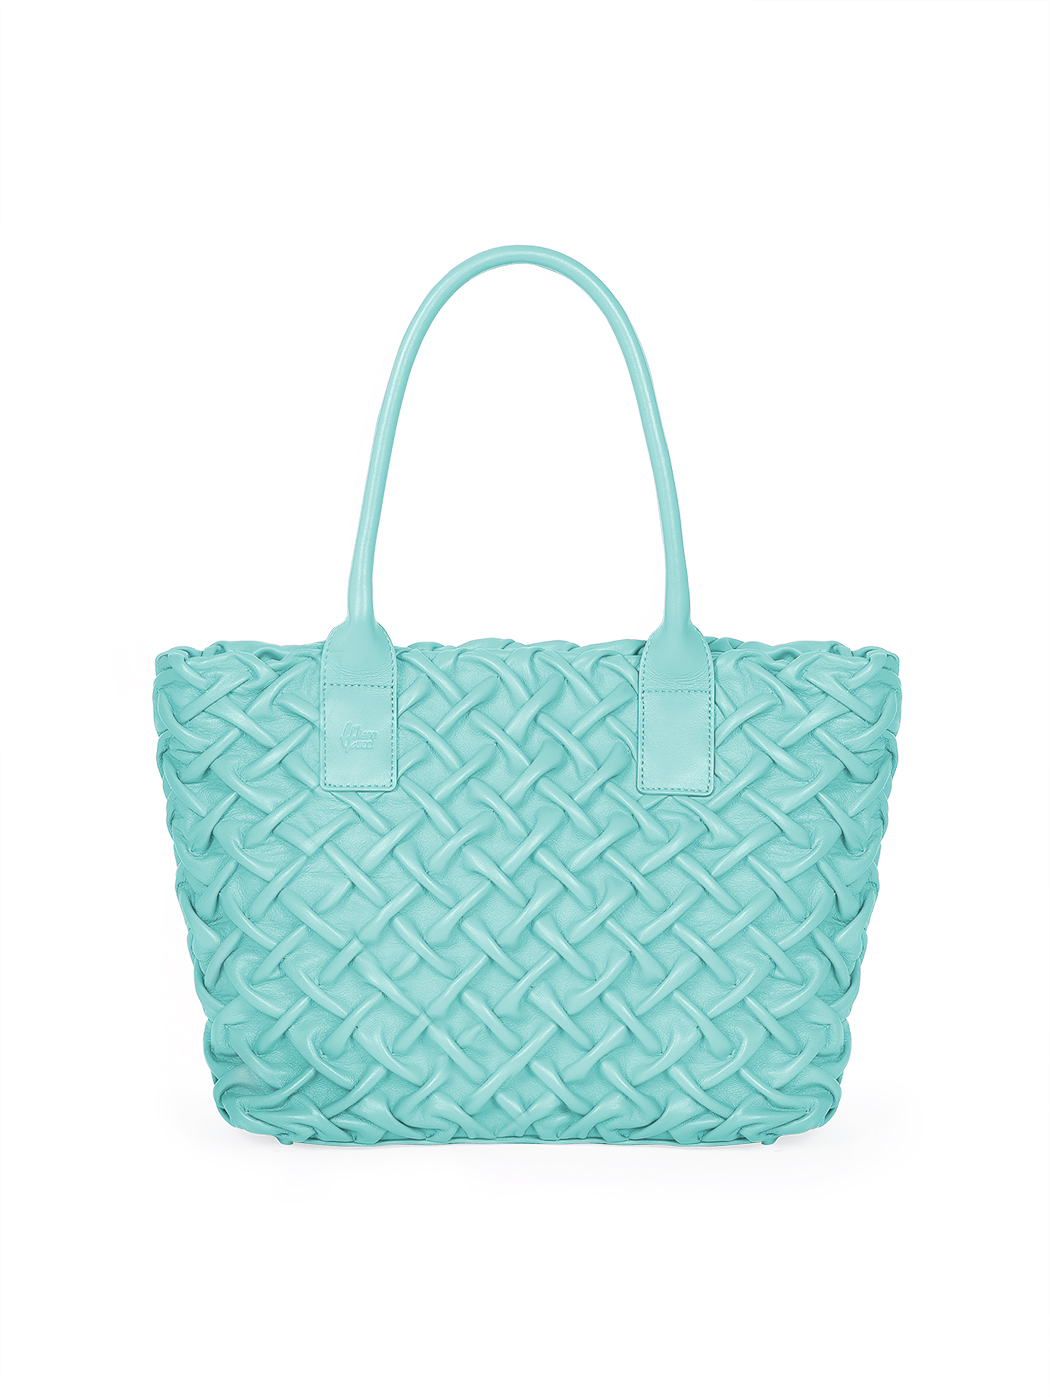 Quilted Weave Leather Satchel Tote Bag Aqua Blue